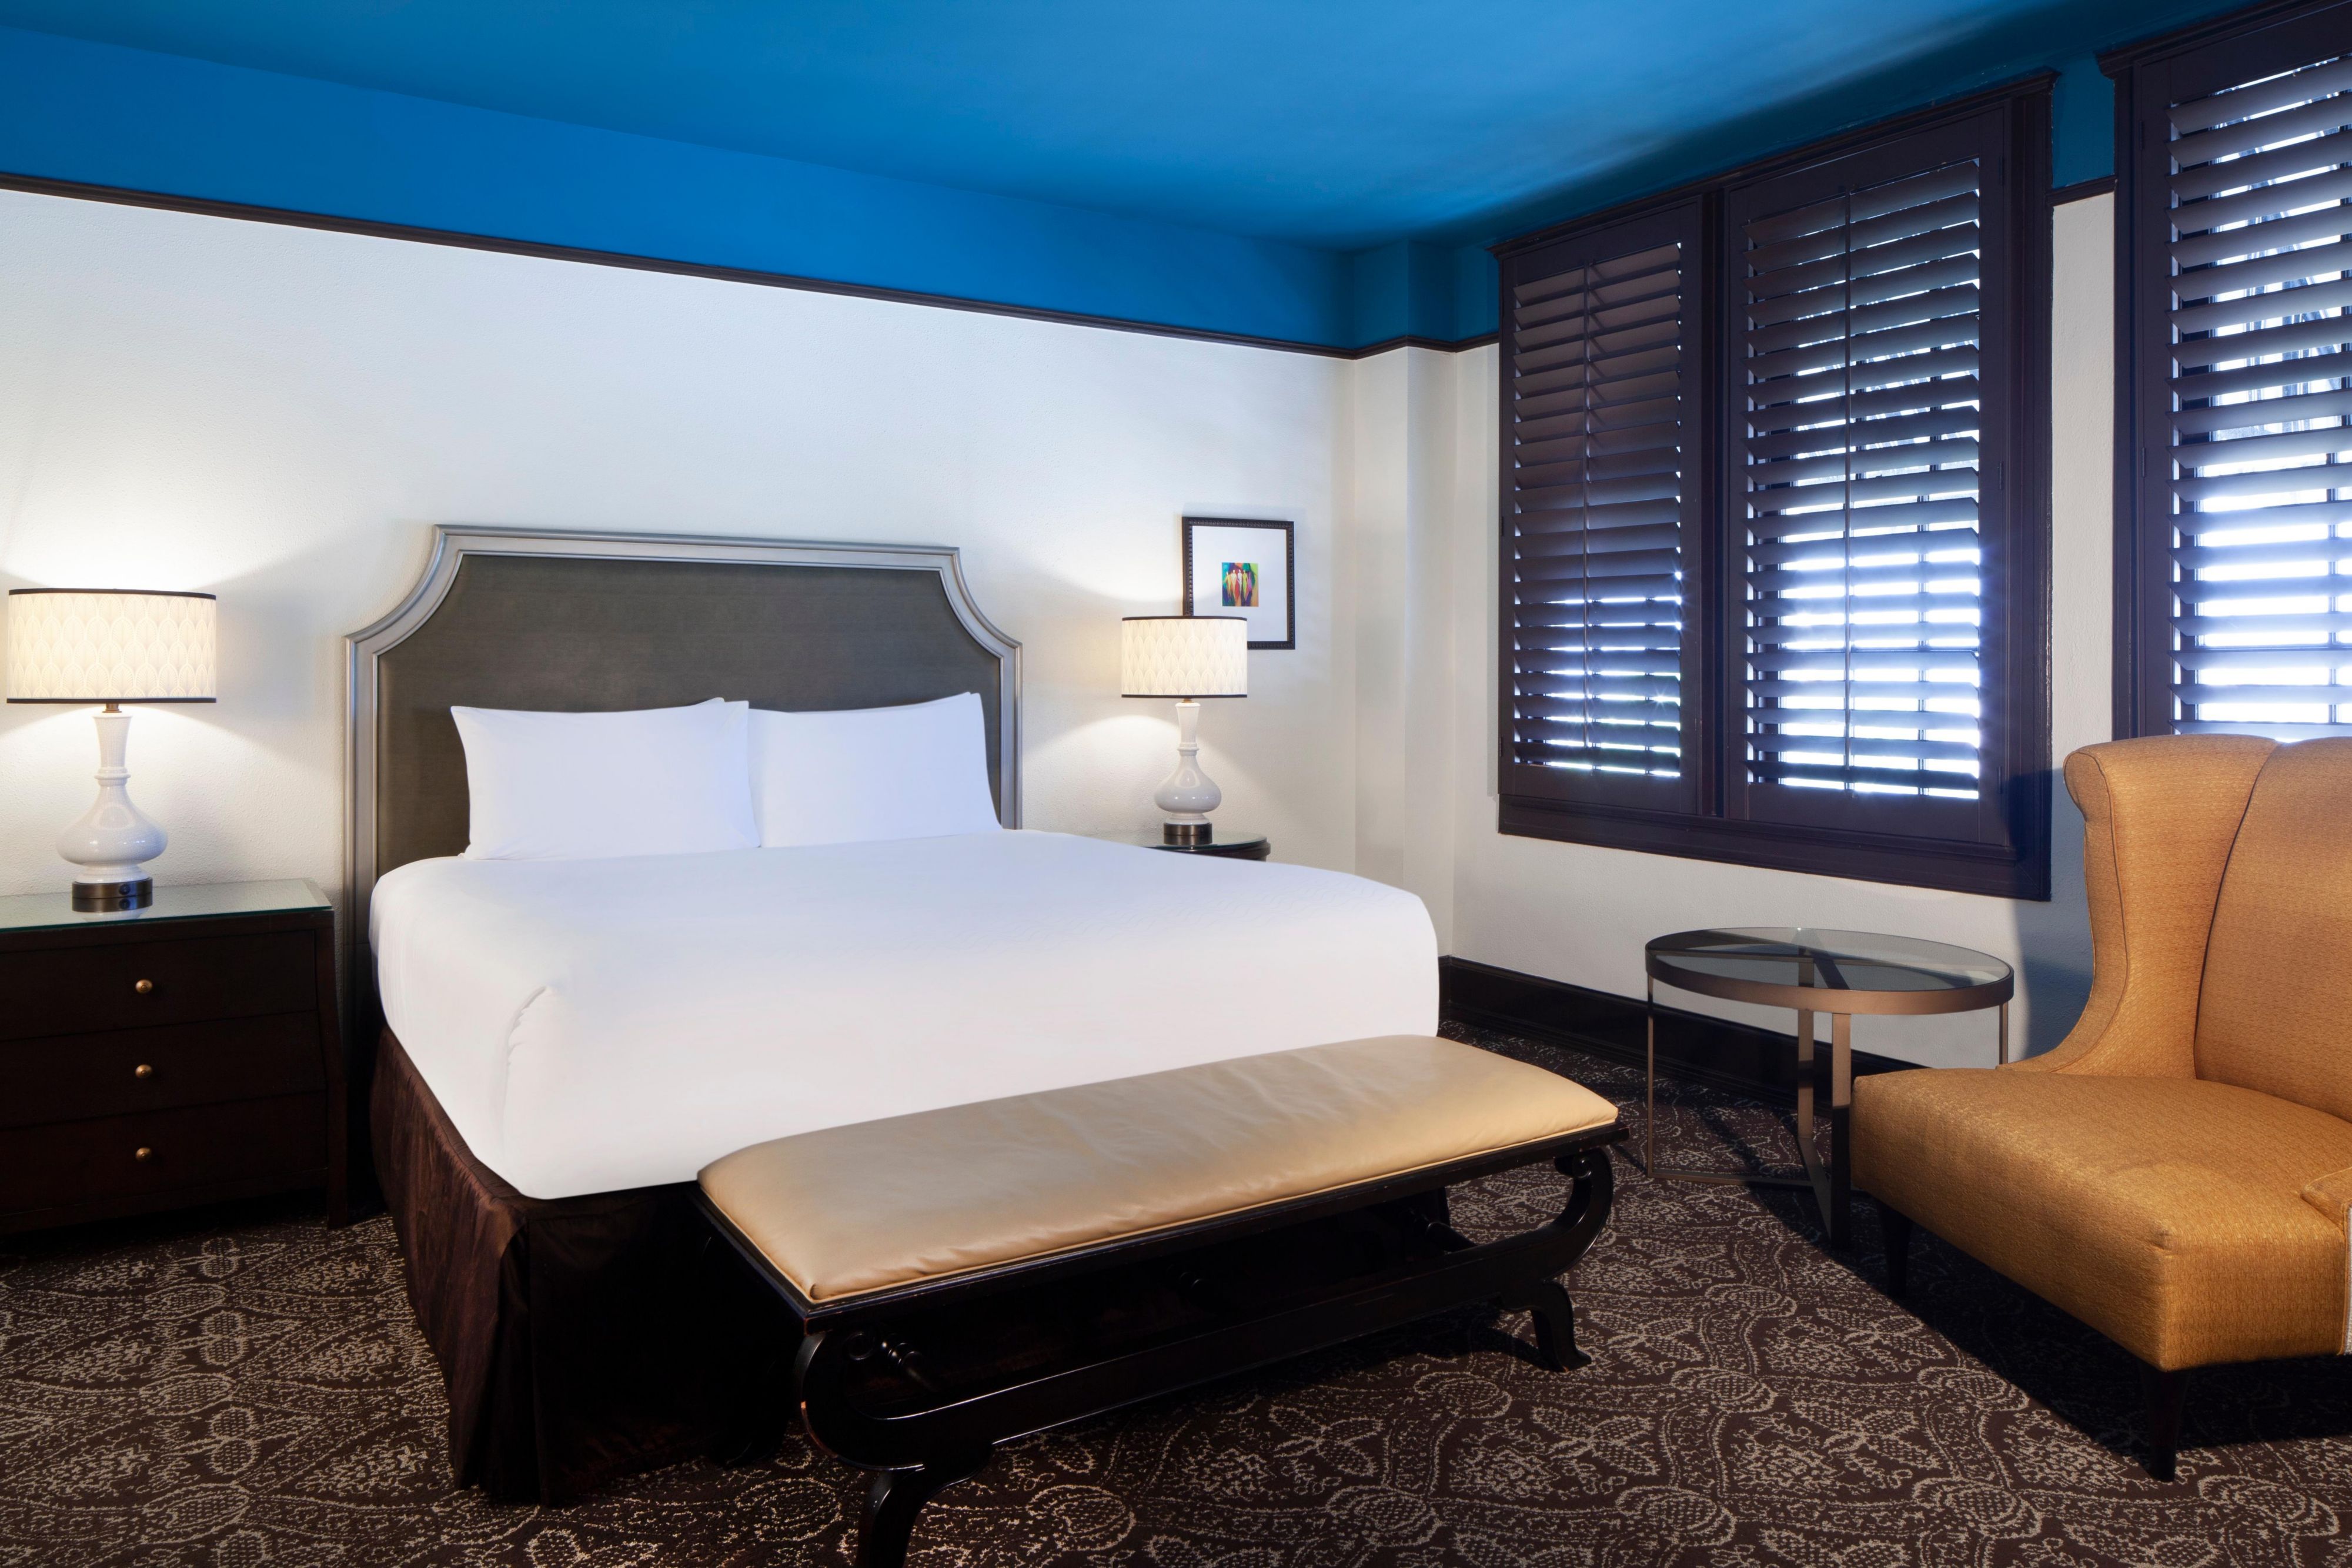 Enjoy our 1 King Bed Room.